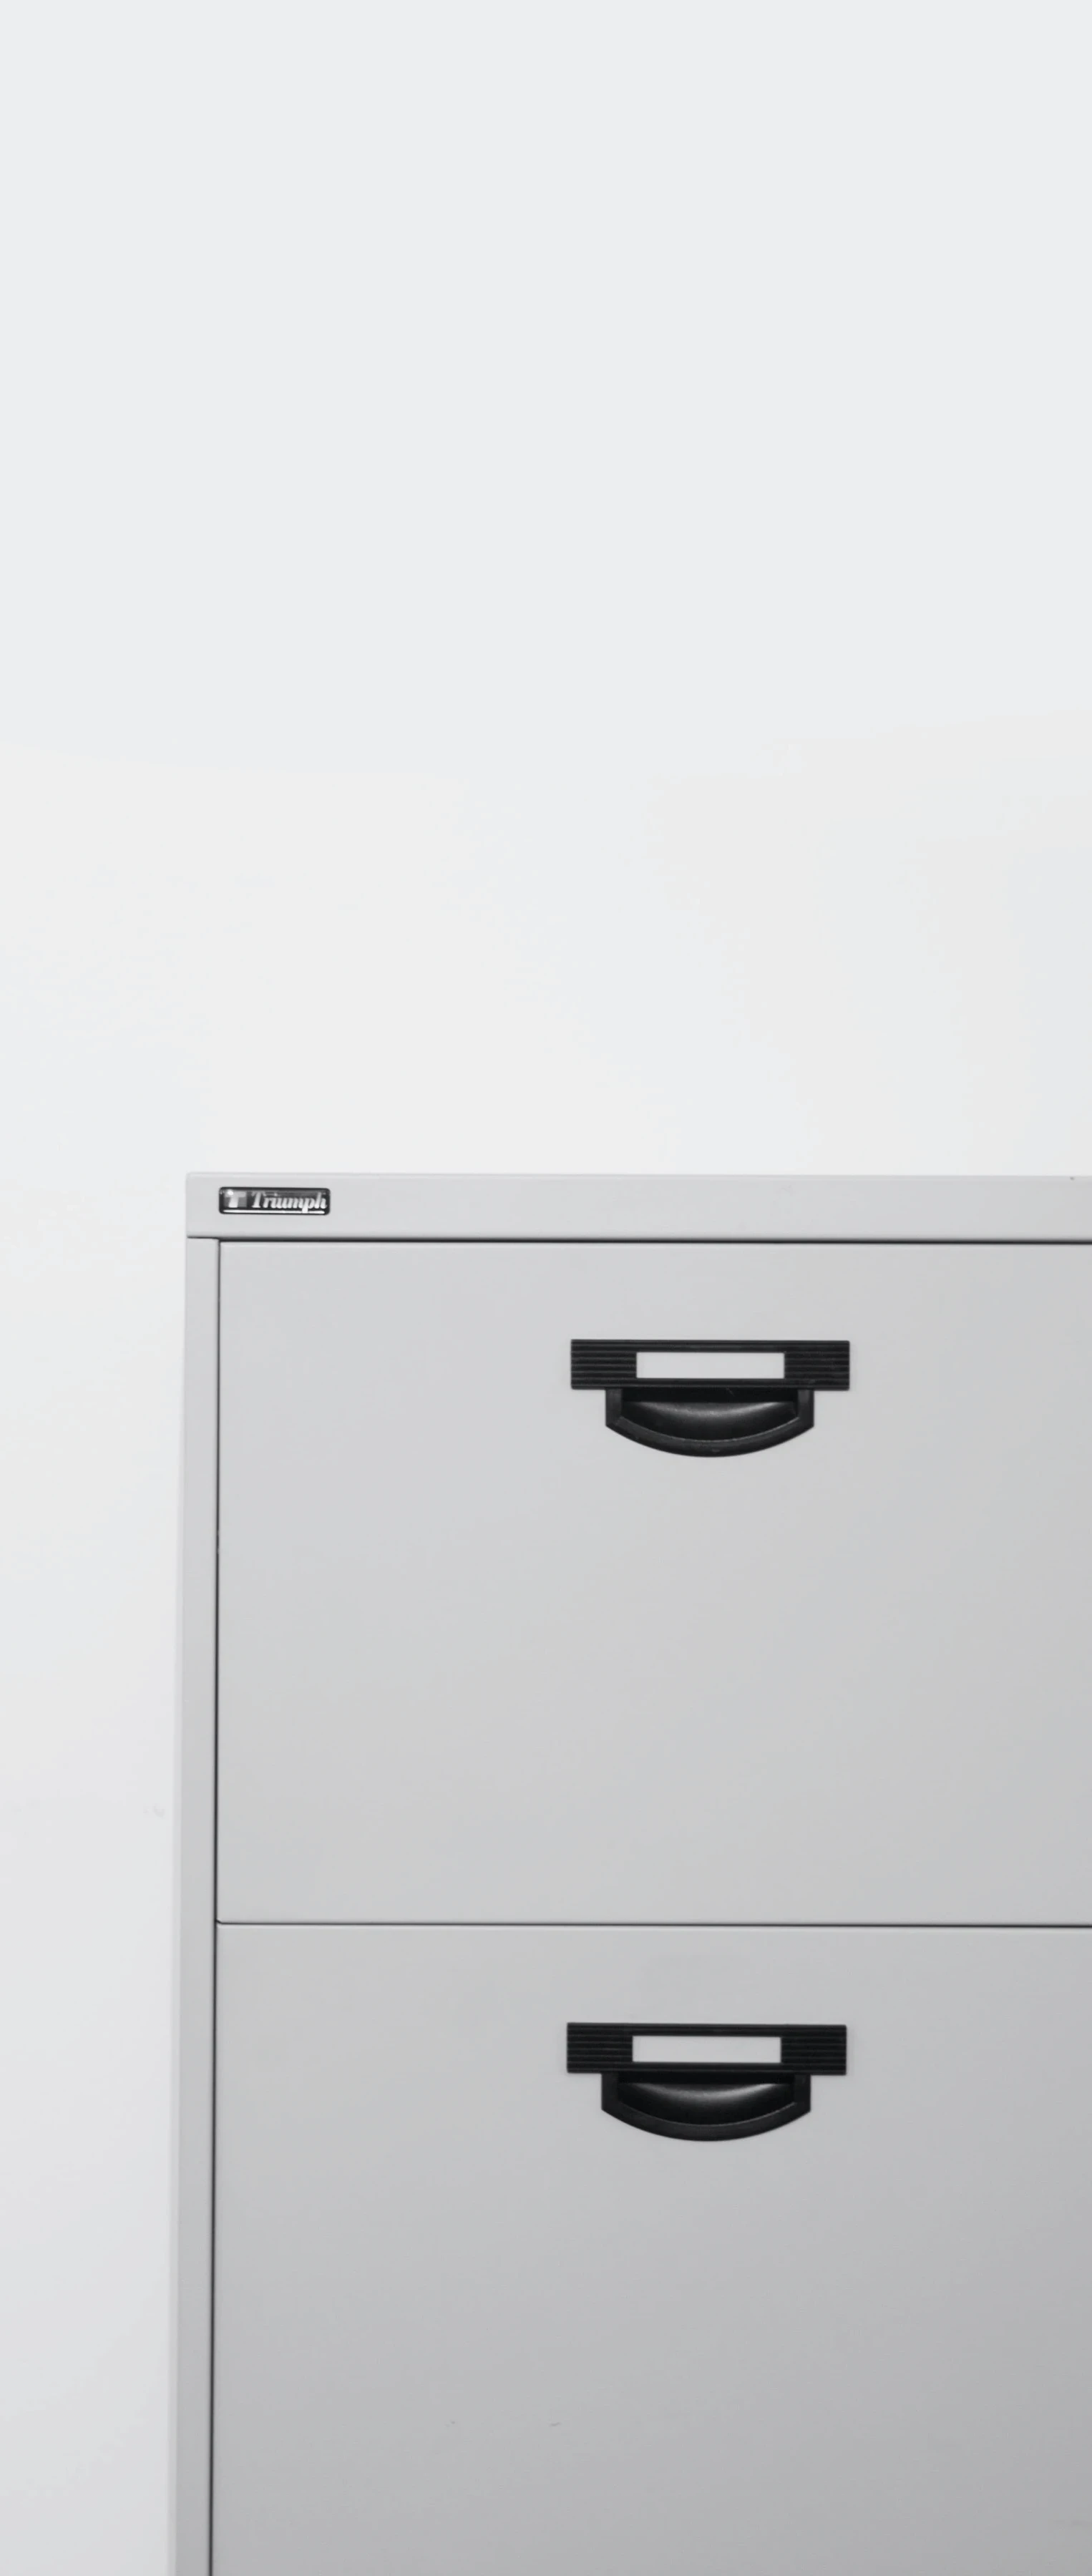 A vertical image featuring the front view of a grey filing cabinet with two drawers, each with a black handle. The cabinet has a label at the top with the text "Triumph," indicating the brand. The background is plain and white, putting the focus on the cabinet.